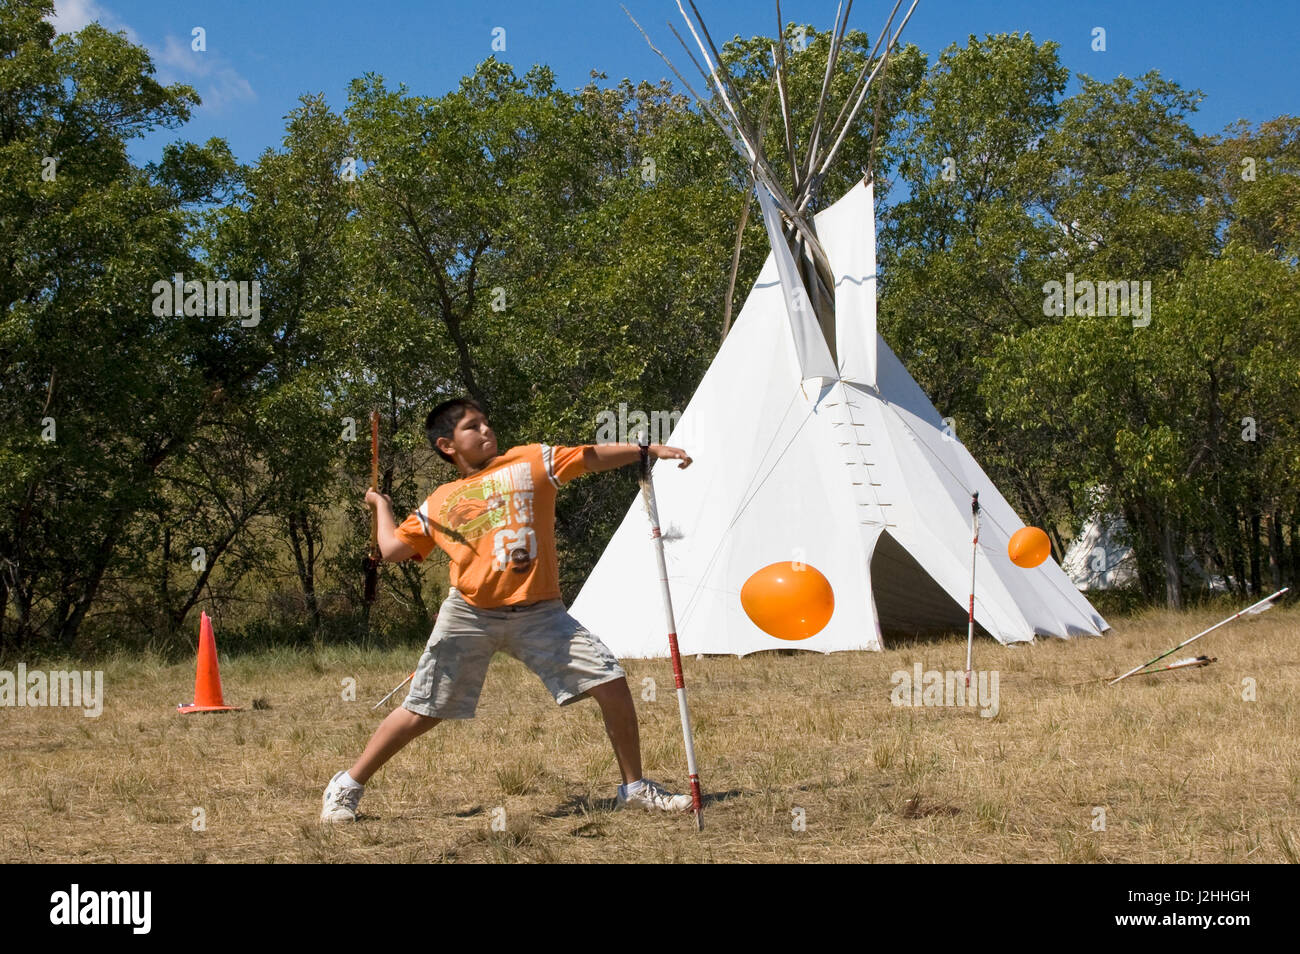 Three Affiliated tribes (Mandan, Arikara and Hidatsa) continue to teach their children many of the traditional games of their ancestors such as the arrow toss game on the Fort Berthold Indian Reservation, North Dakota Stock Photo